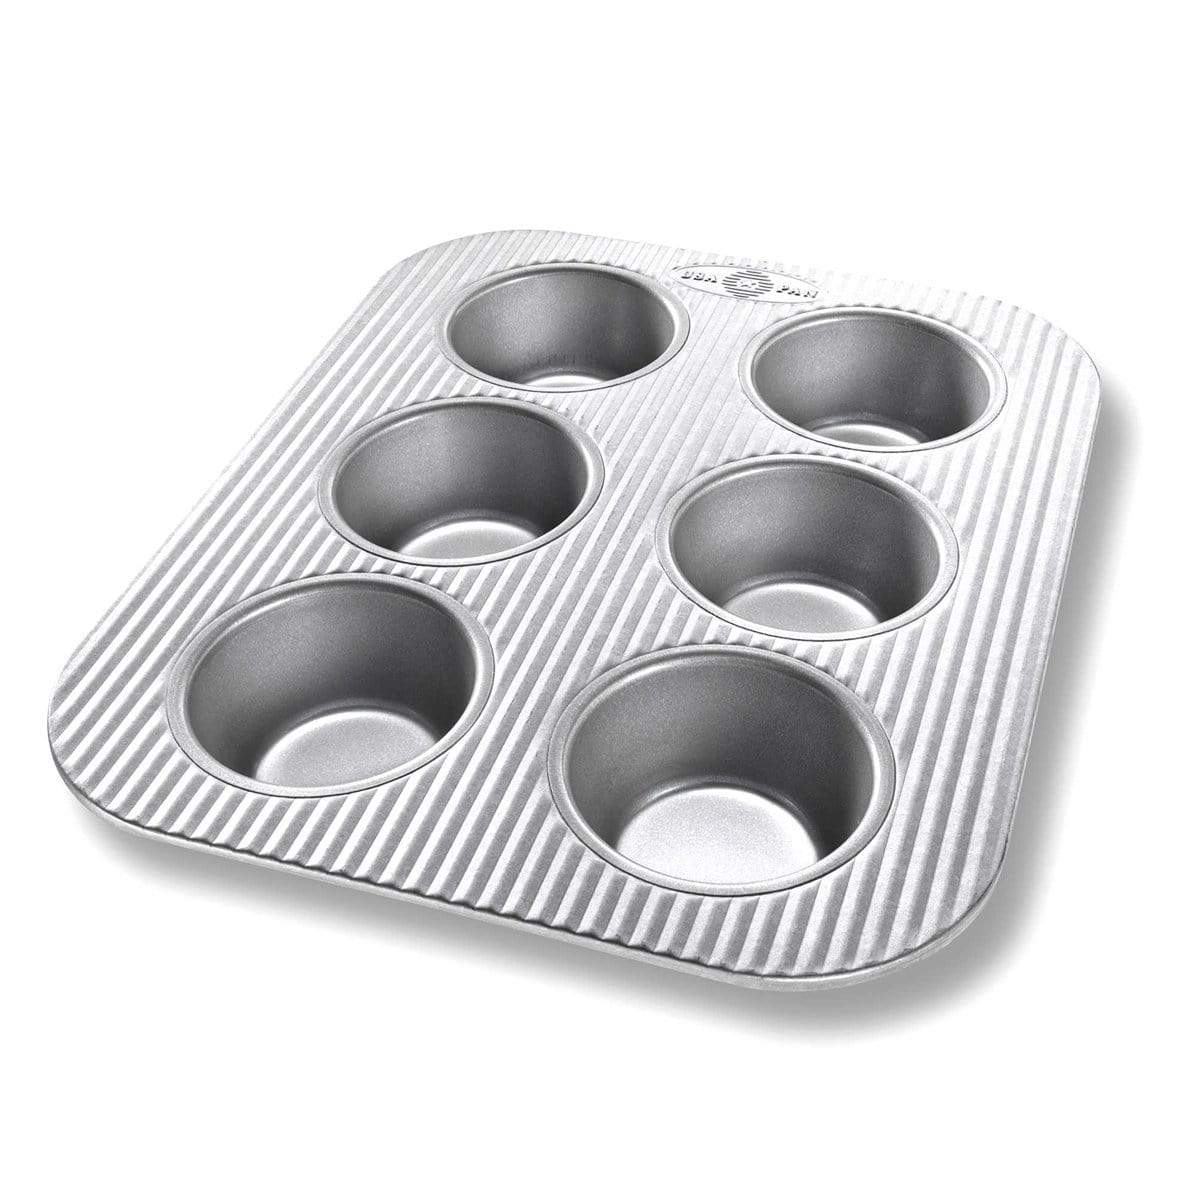 OXO Good Grips Non-Stick 12 Cup Aluminized Steel Muffin Baking Pan - New.